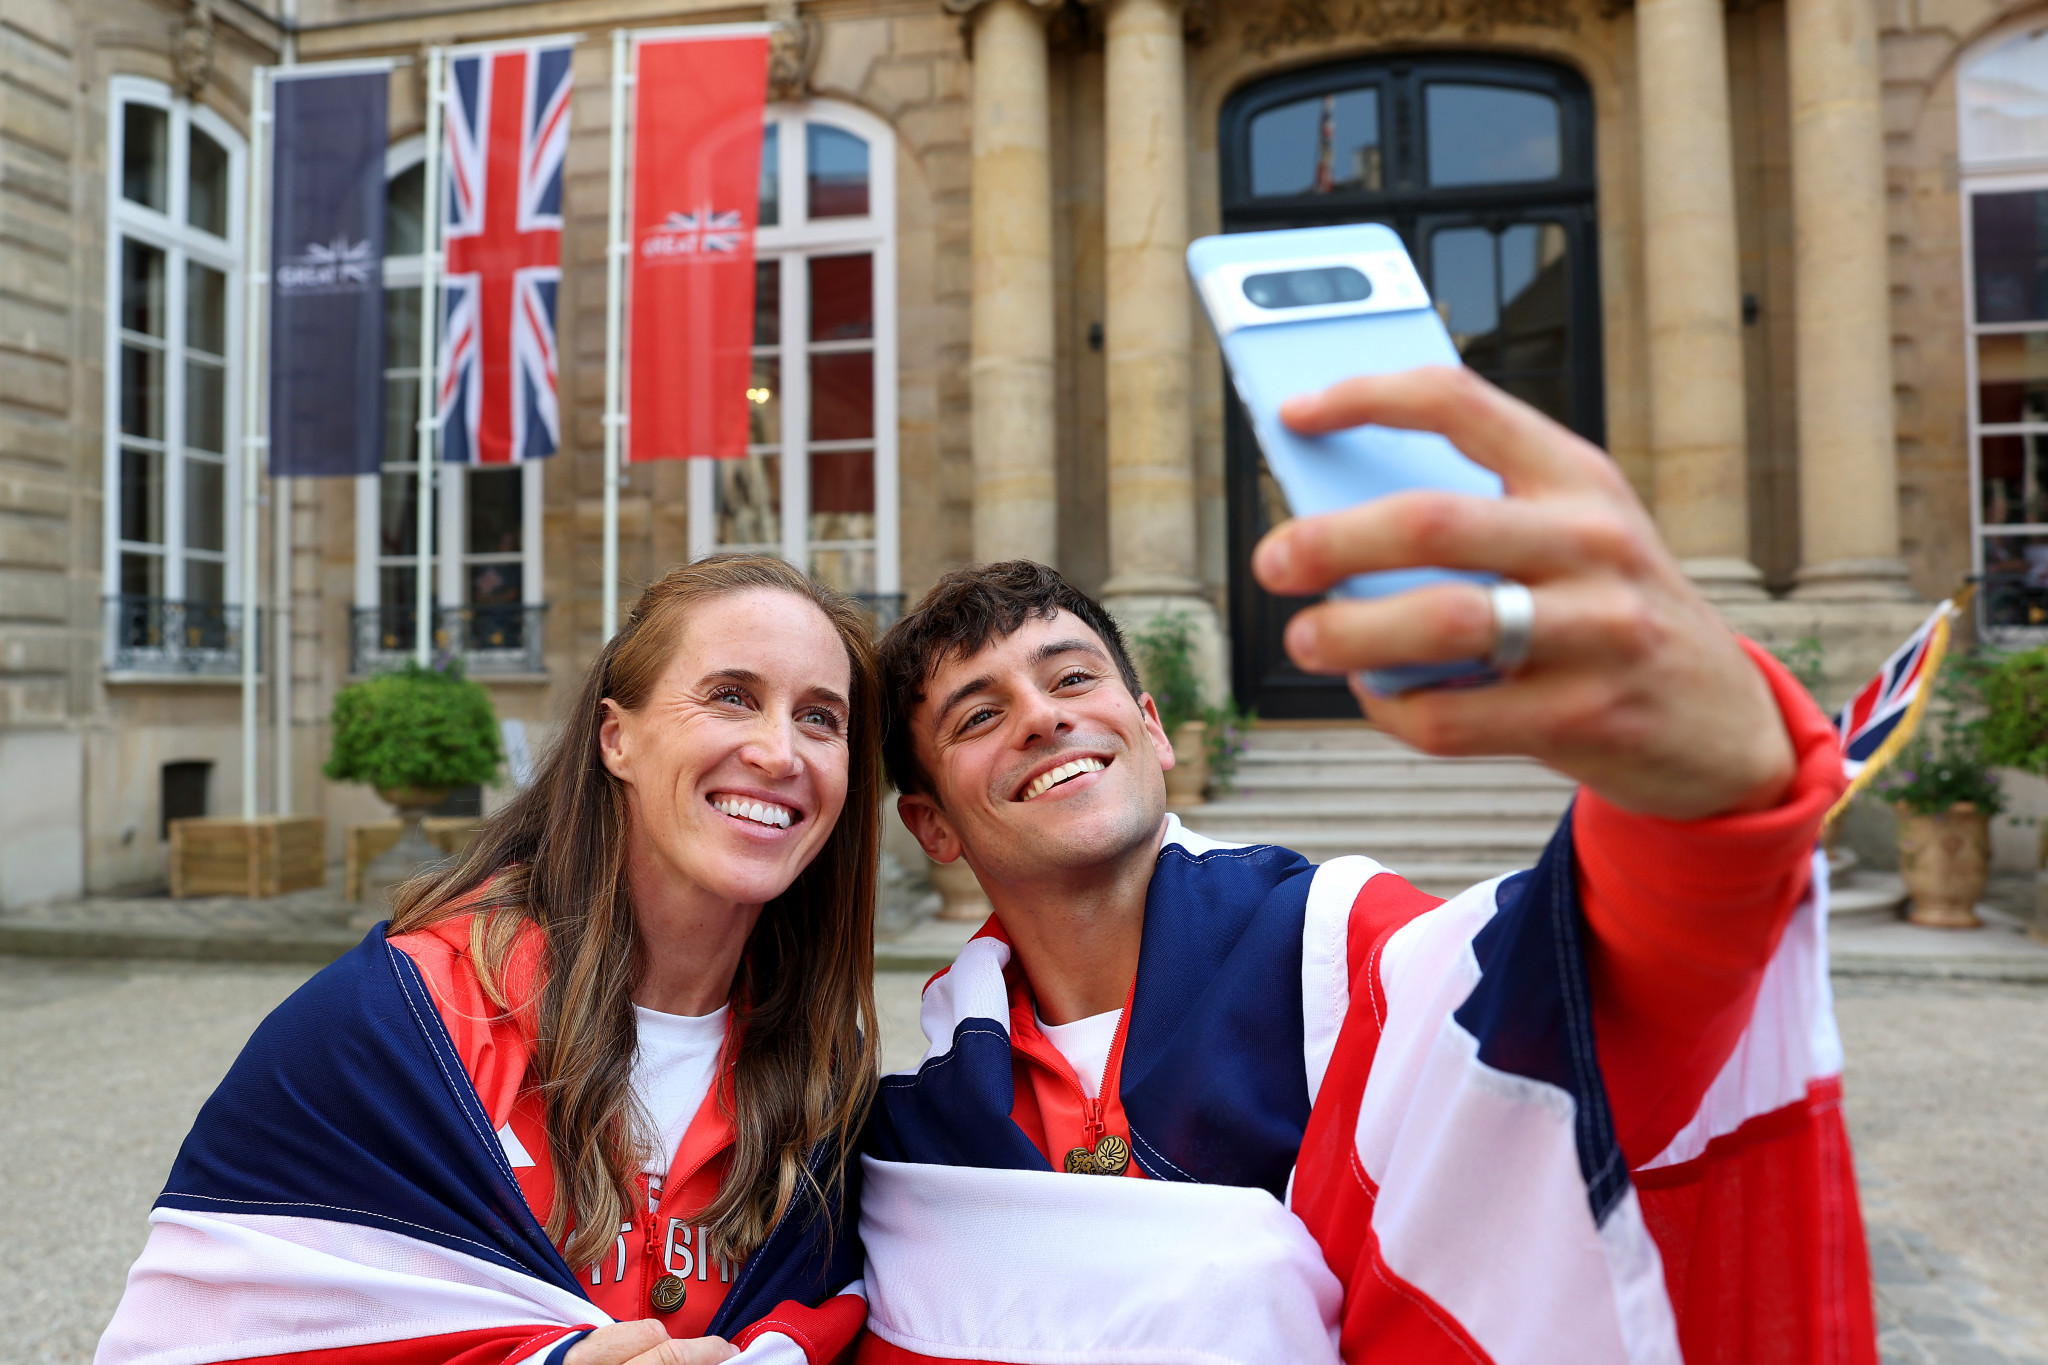 Helen Glover and Tom Daley are Great Britain's flagbearers. GETTY IMAGES